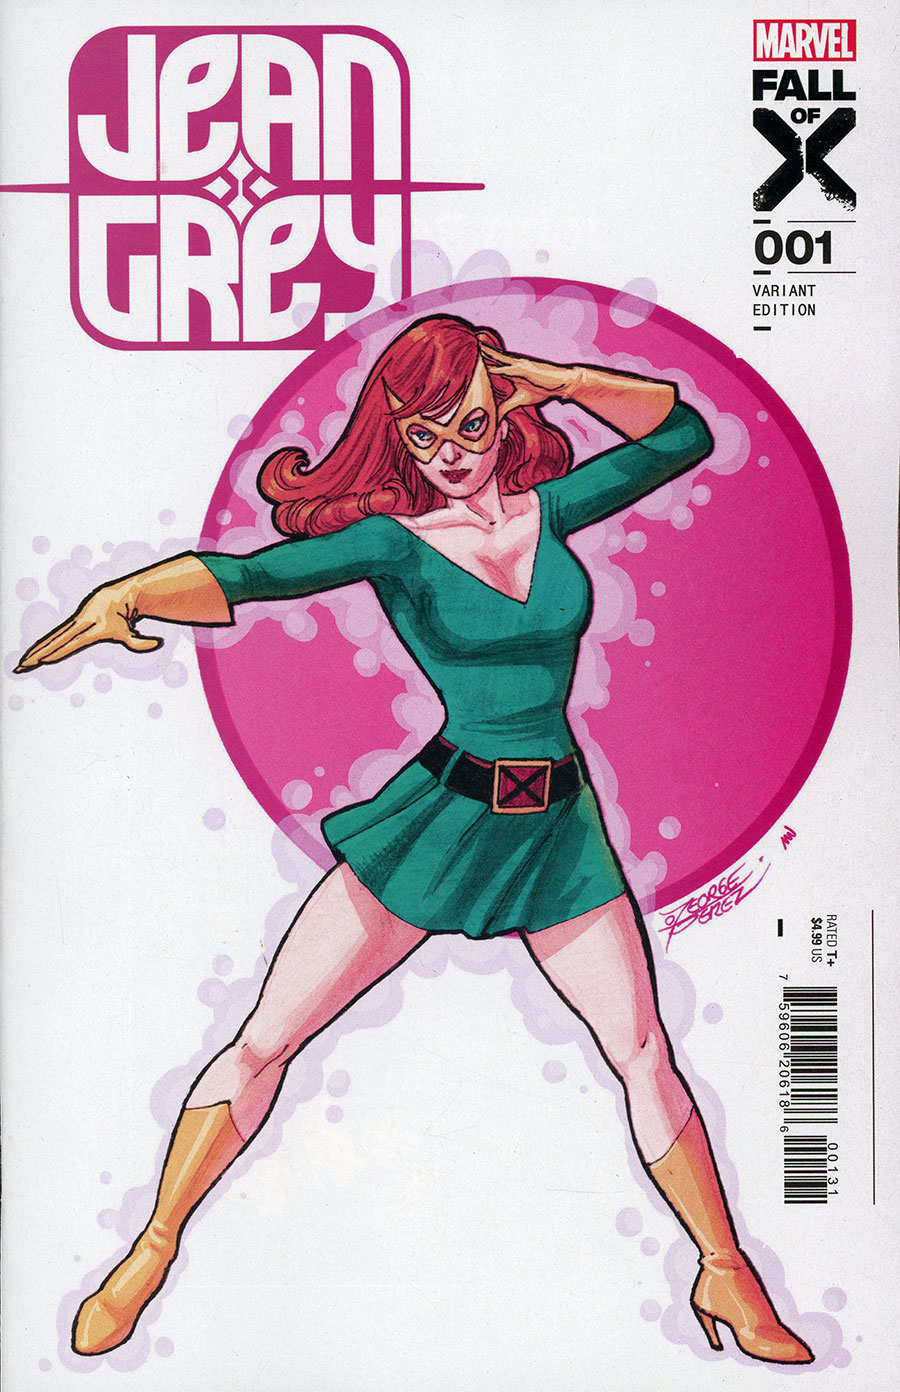 Jean Grey Vol 2 #1 Cover B Variant George Perez Cover (Fall Of X Tie-In)